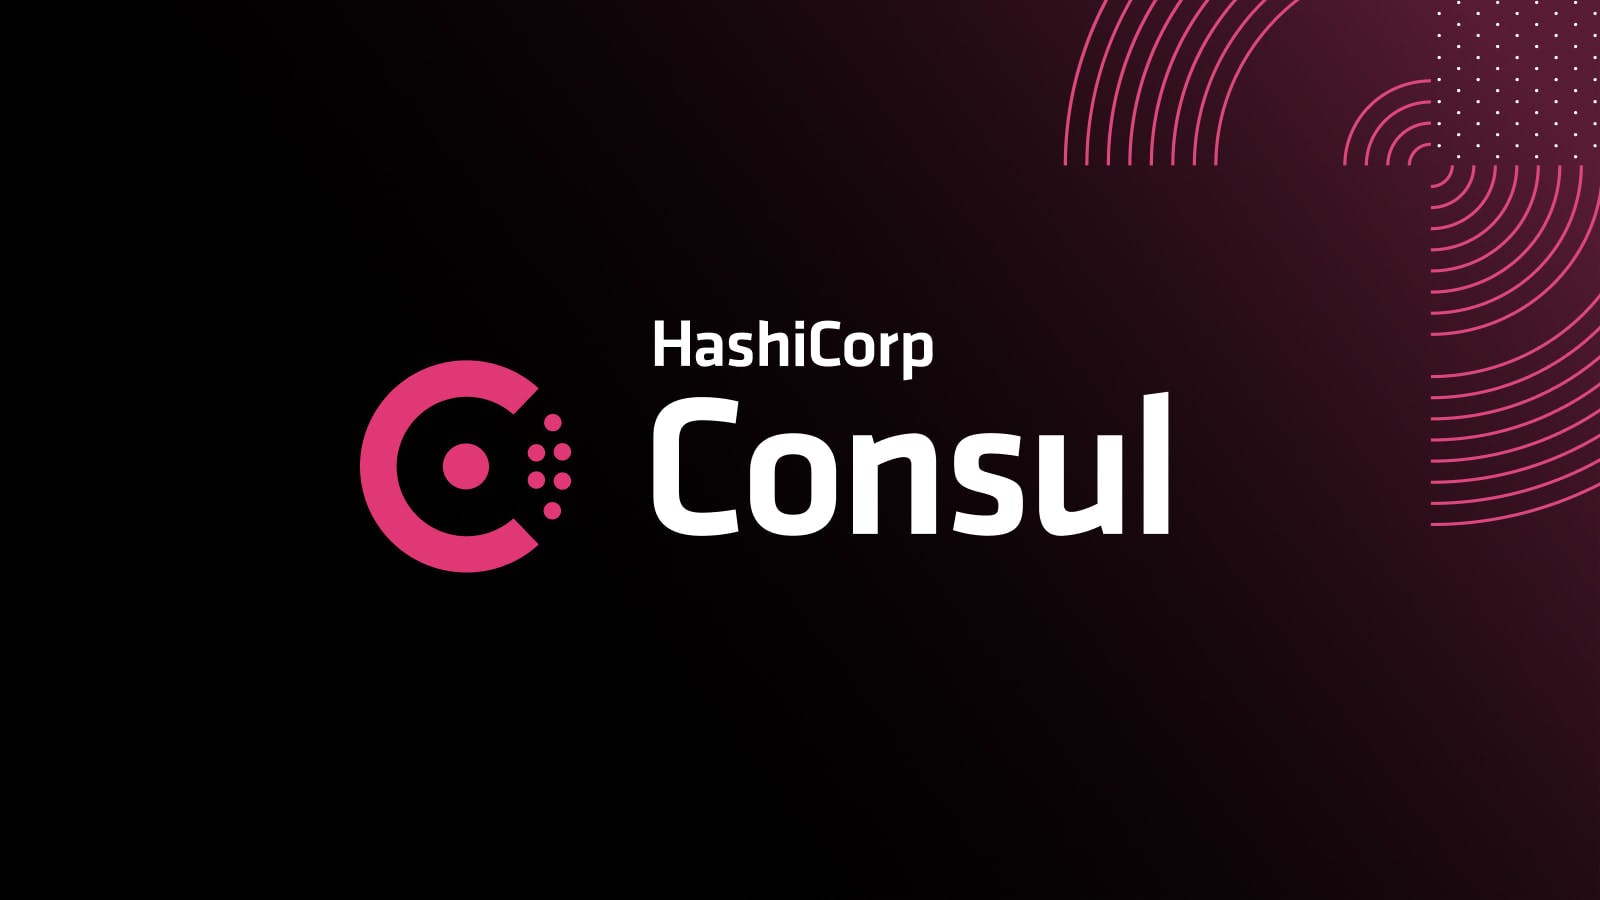 Consul 1.16 enhances service mesh reliability, user experience, and security